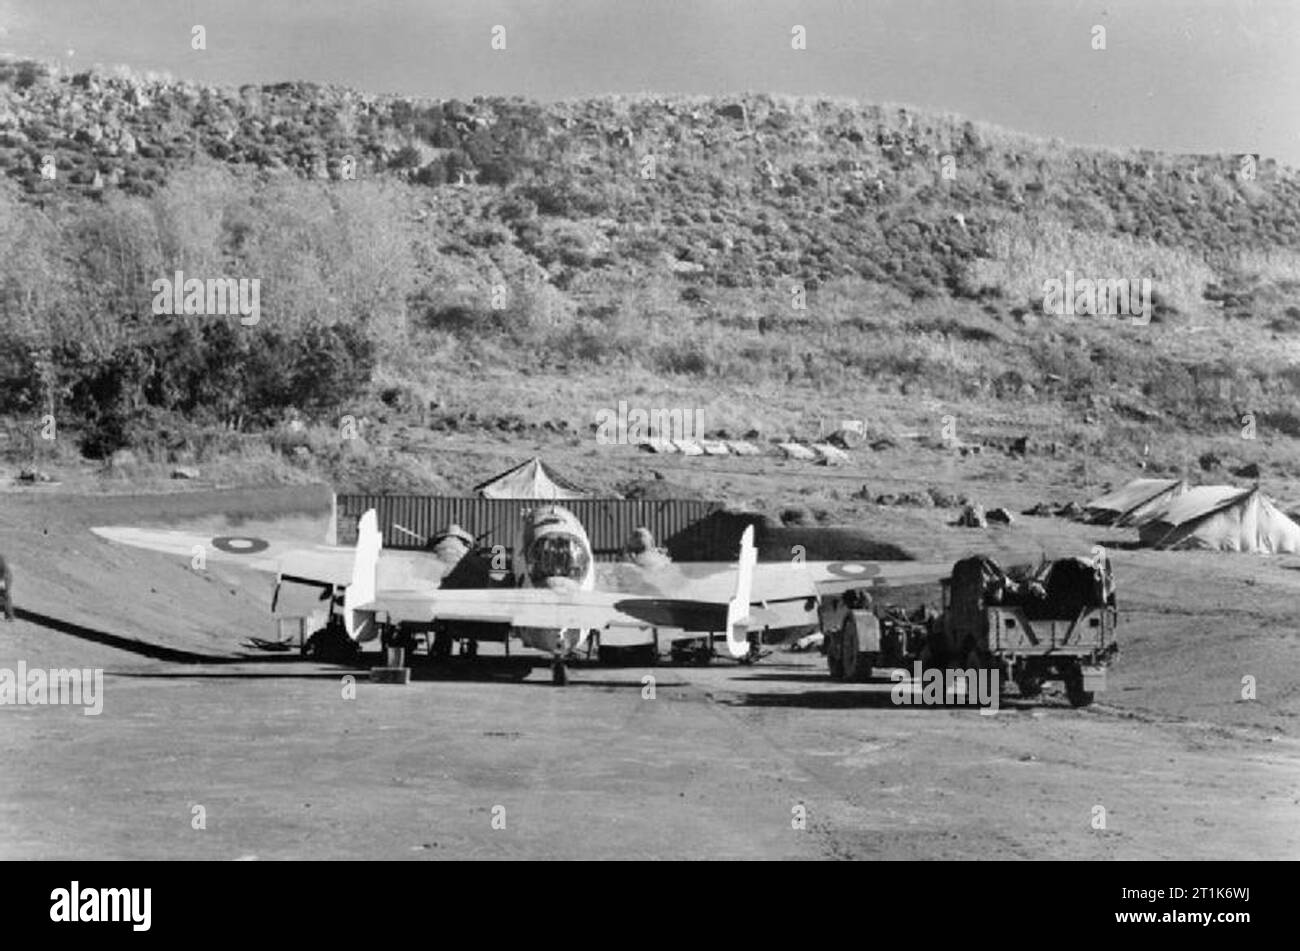 Royal Air Force Coastal Command- No. 247 Group Operations in the Azores, 1943-1945. A Lockheed Hudson Mark III of No. 233 Squadron RAF Detachment, undergoes servicing in a dispersal at Lagens. Stock Photo